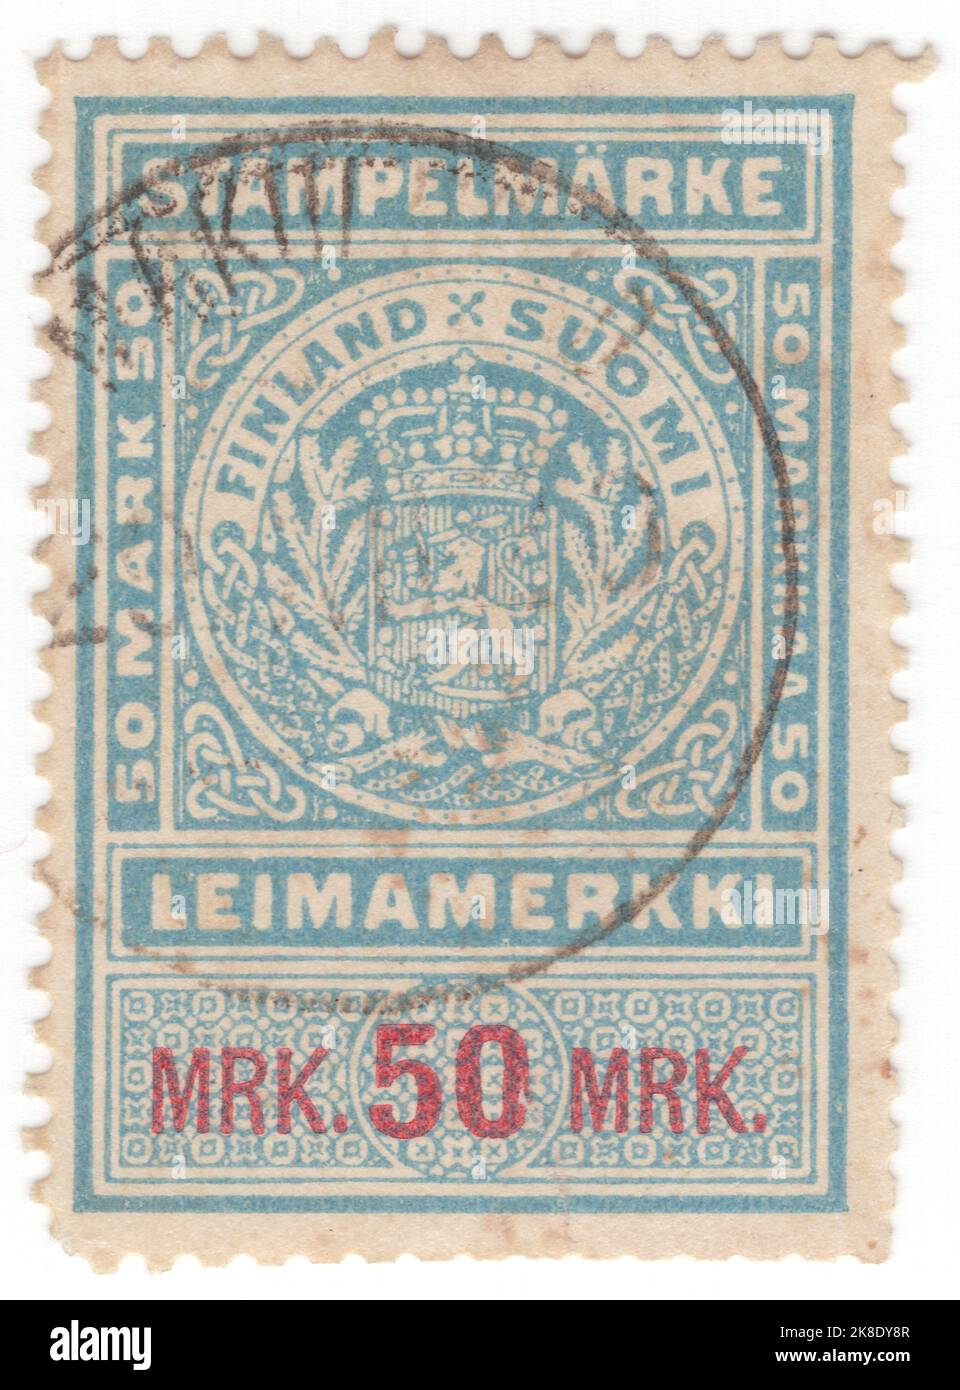 FINLAND - CIRCA 1882: An 50 mark light blue and carmine Postal-fiscal stamp with coat of arms in circular frame 'Finland Suomi' tax stamp Stock Photo